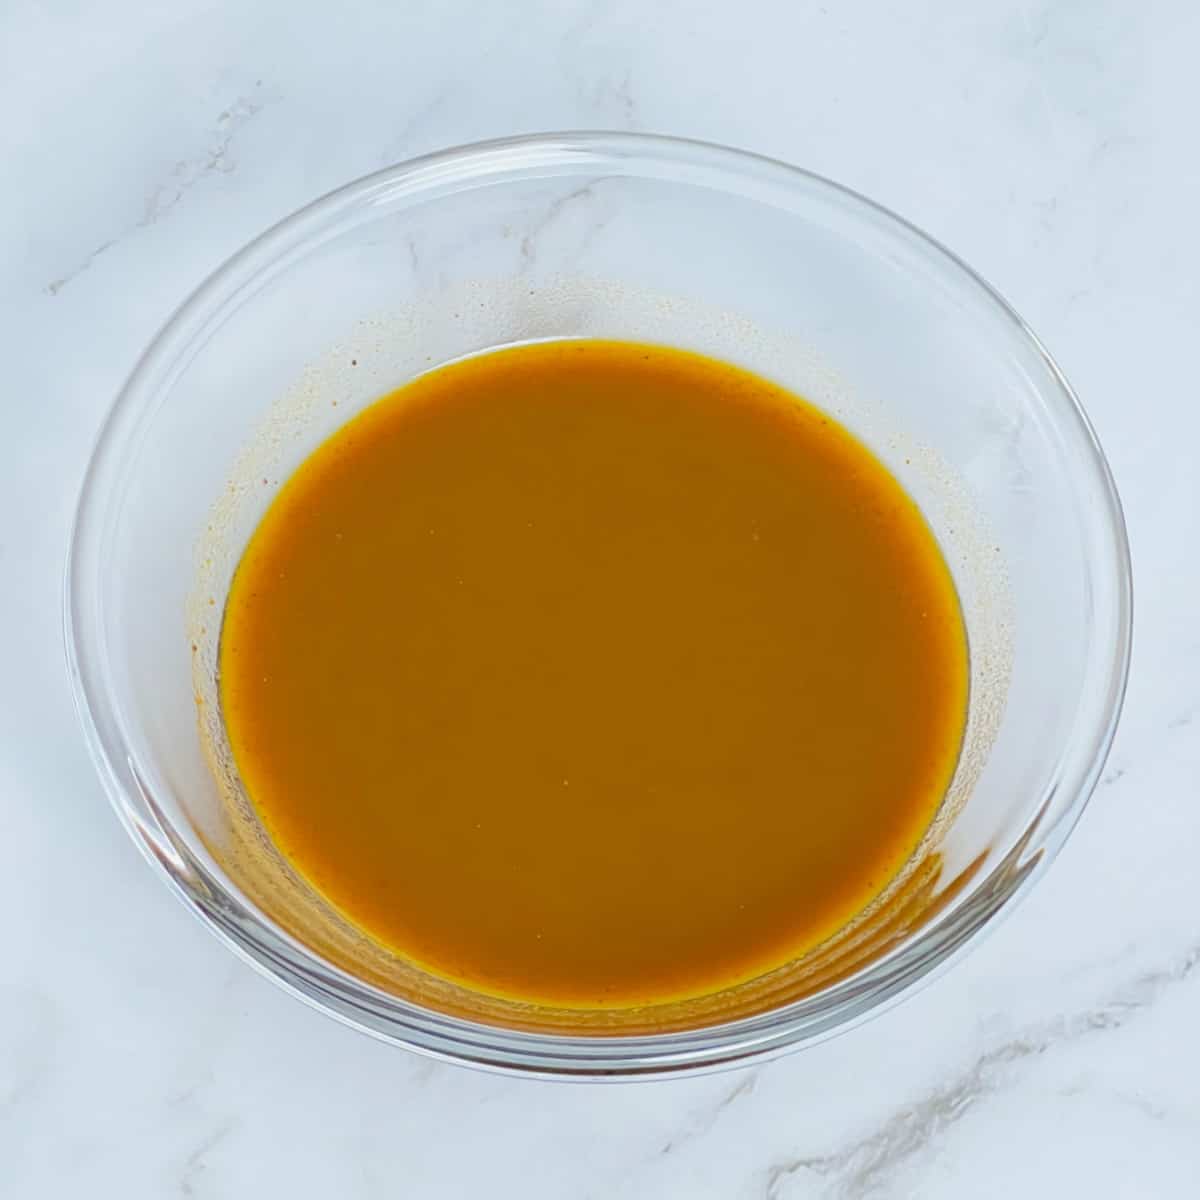 Pumpkin chai concentrate placed in a glass bowl.